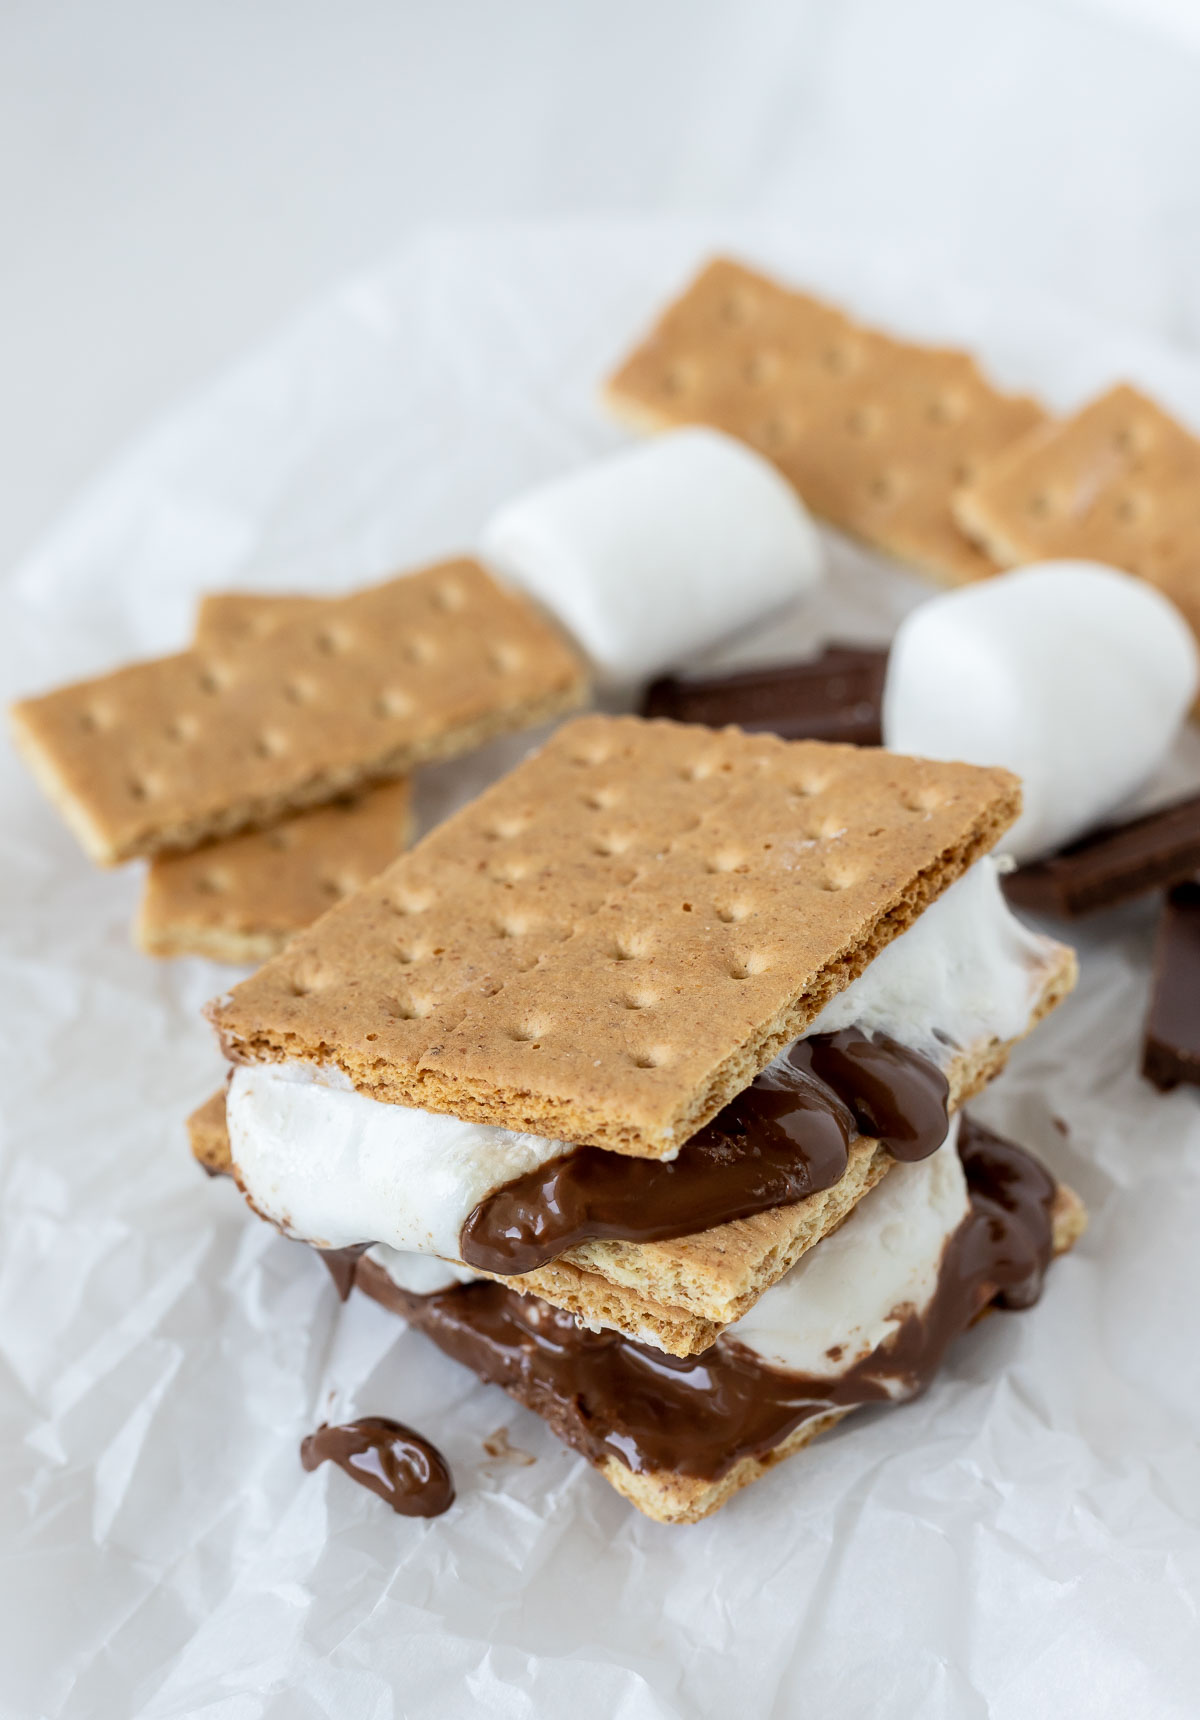 prepared melty smores on parchment paper